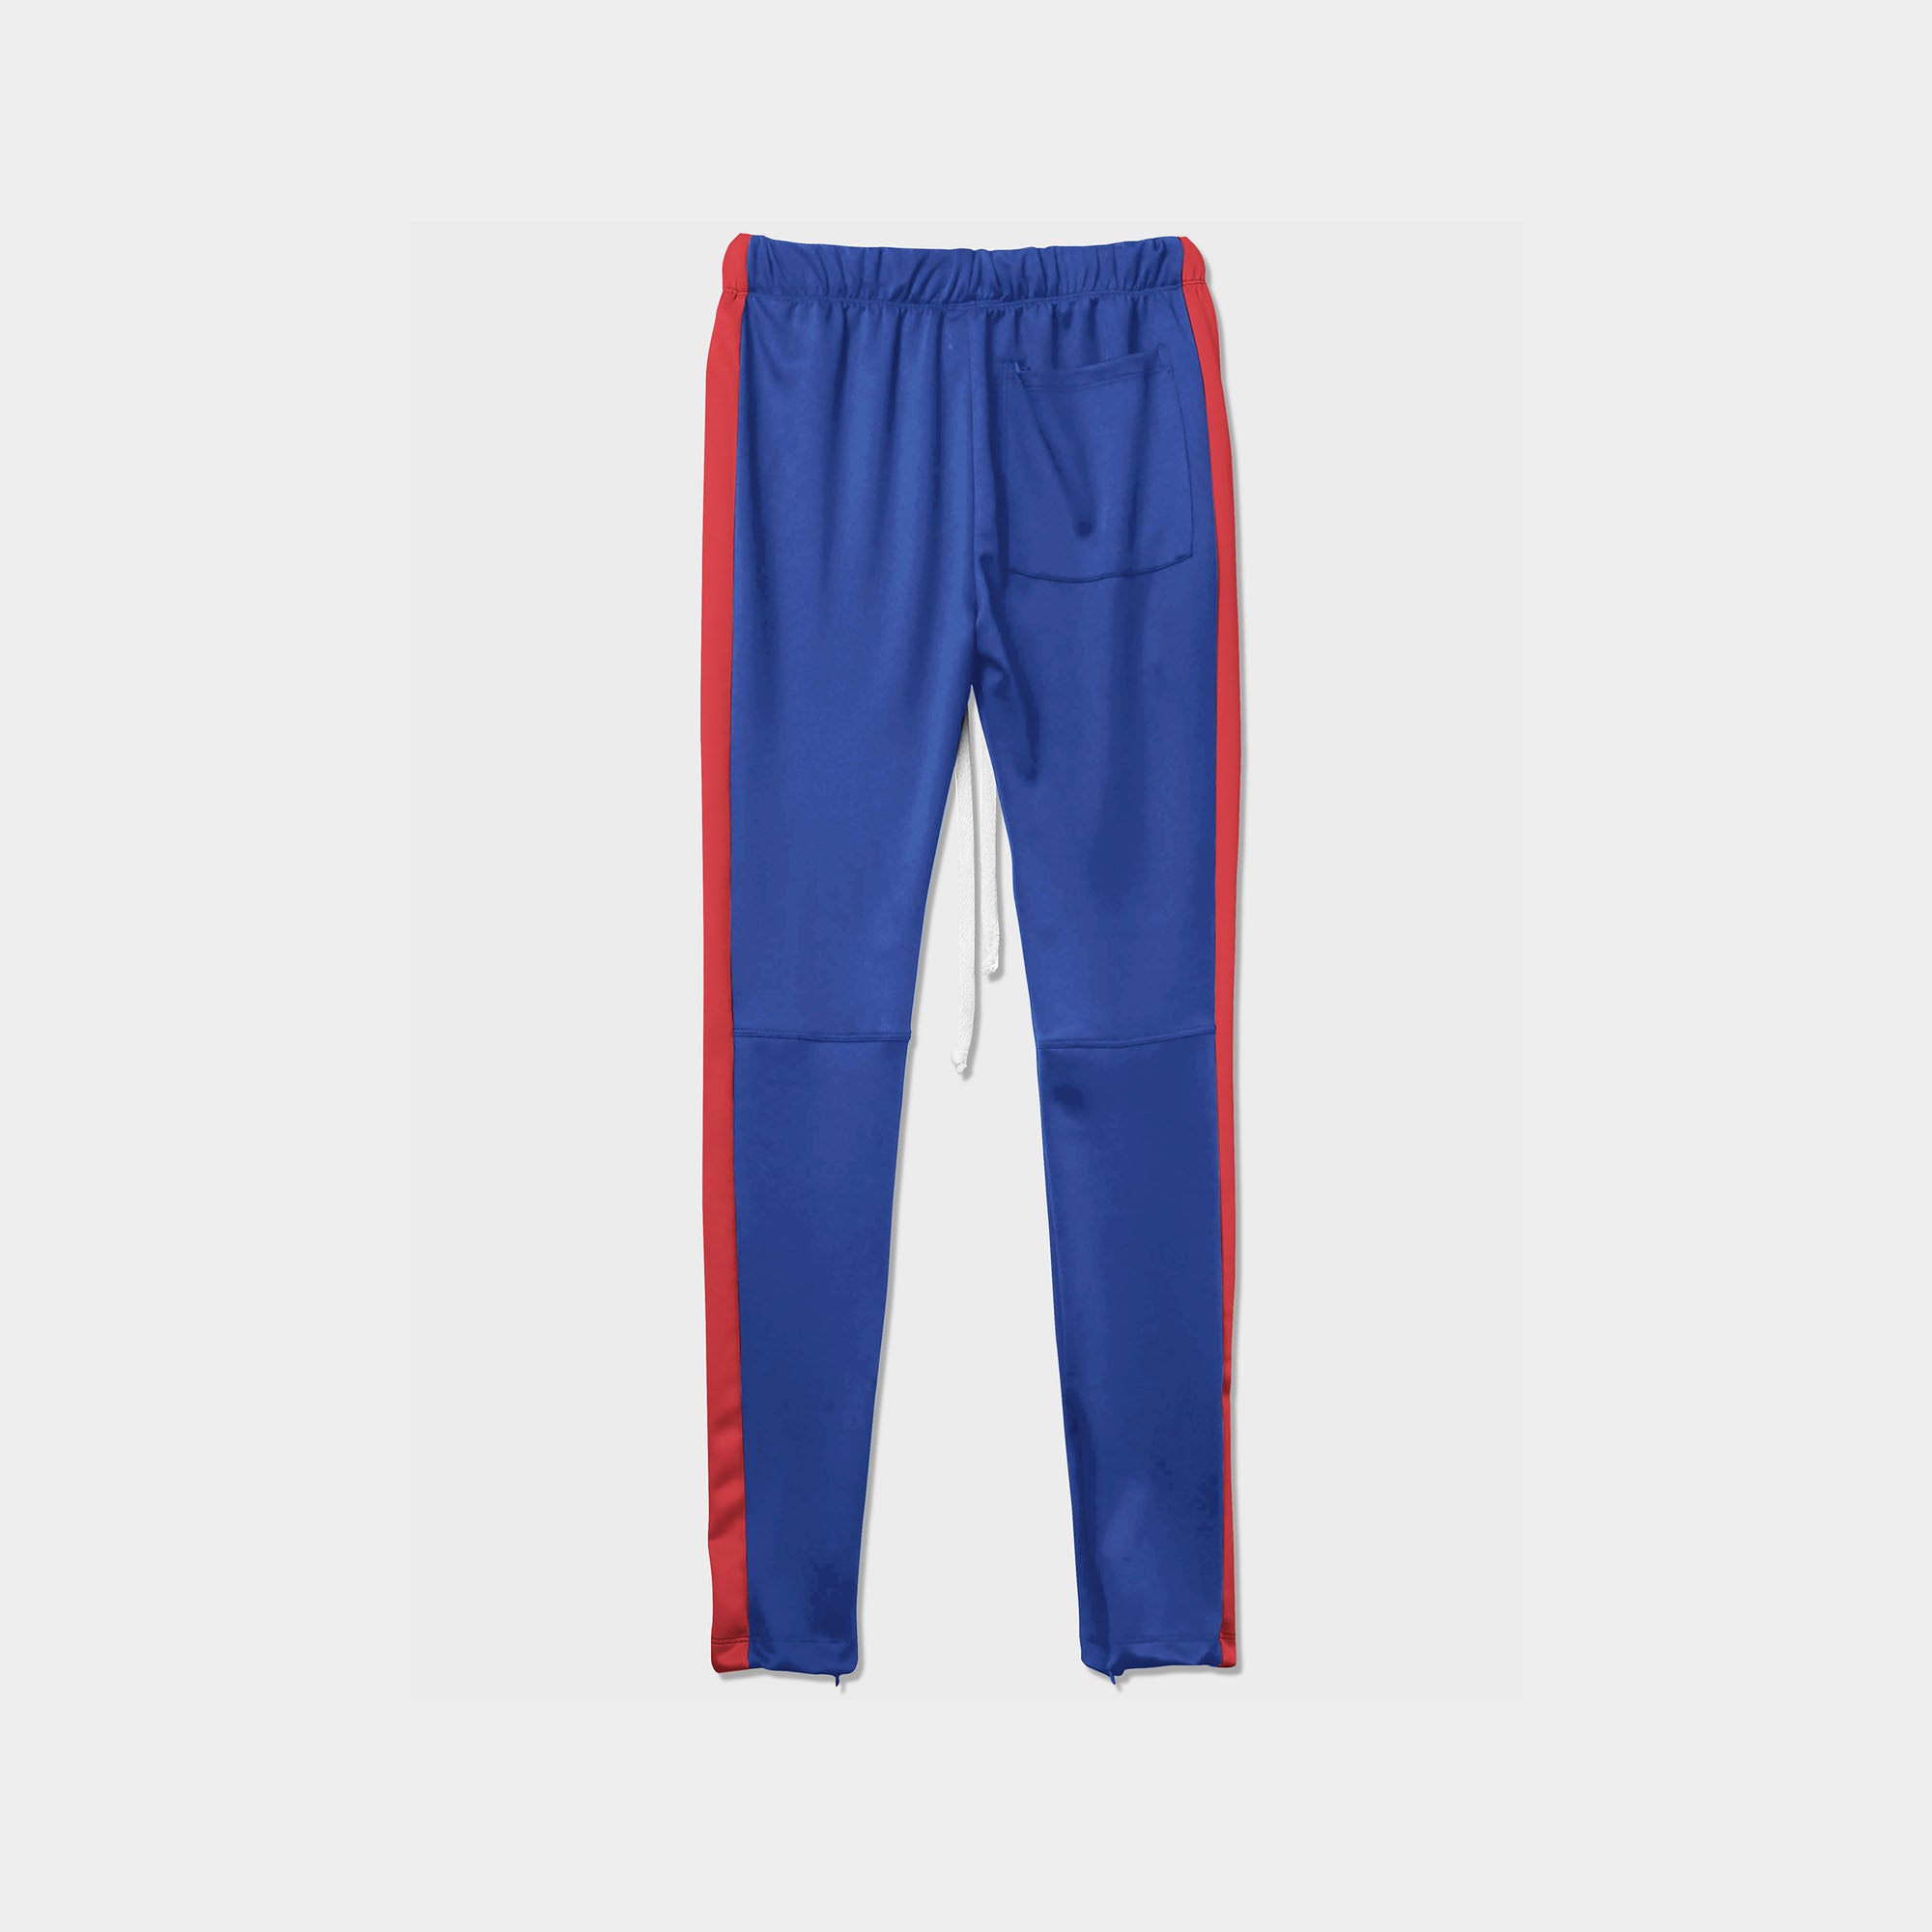 jogger_striped joggers_striped sweatpants_velvet joggers mens_sweatpants_side stripe joggers mens_champion sweatpants_champion joggers_mens joggers_Royal Blue/Red